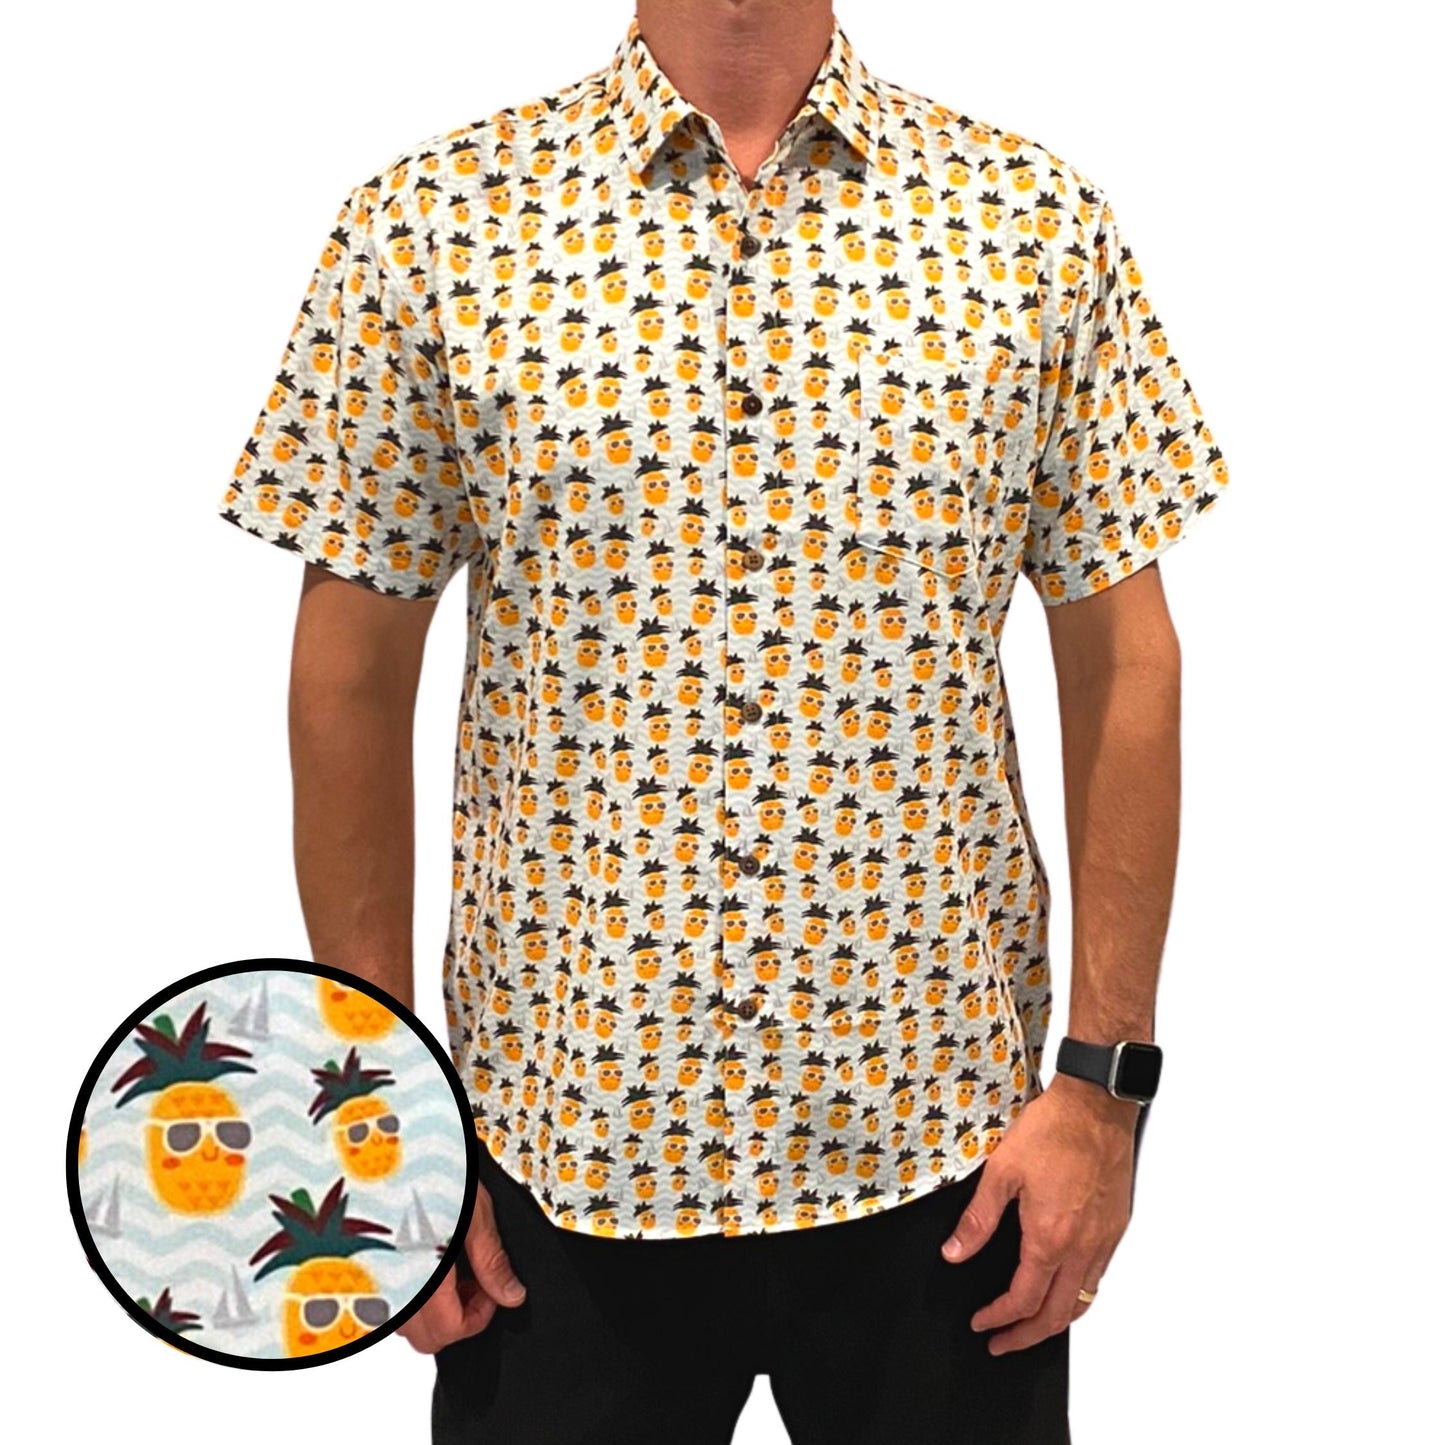 Super Stretch - The Pineapple King Hawaiian Shirt by Tropical Bros